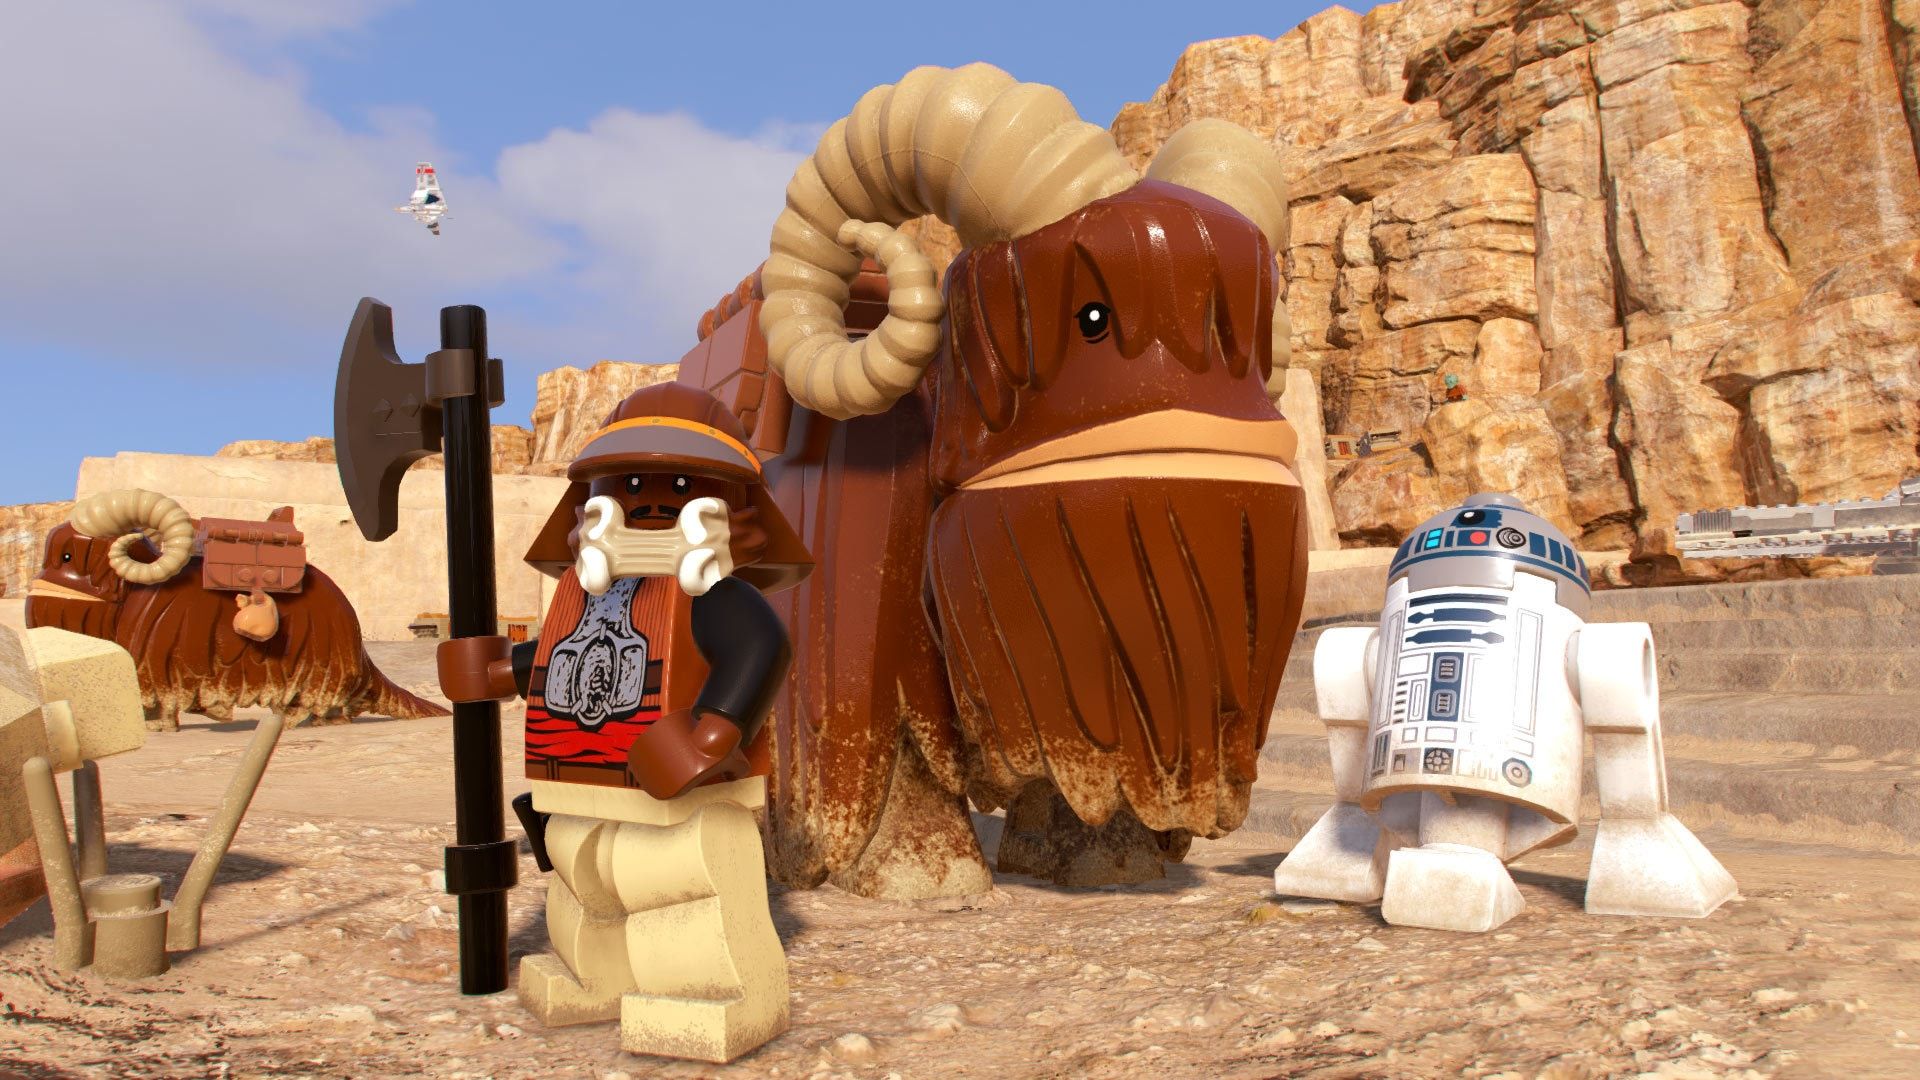 Screenshot from Lego Star Wars The Skywalker Saga showing Lego versions of classic Star Wars characters.